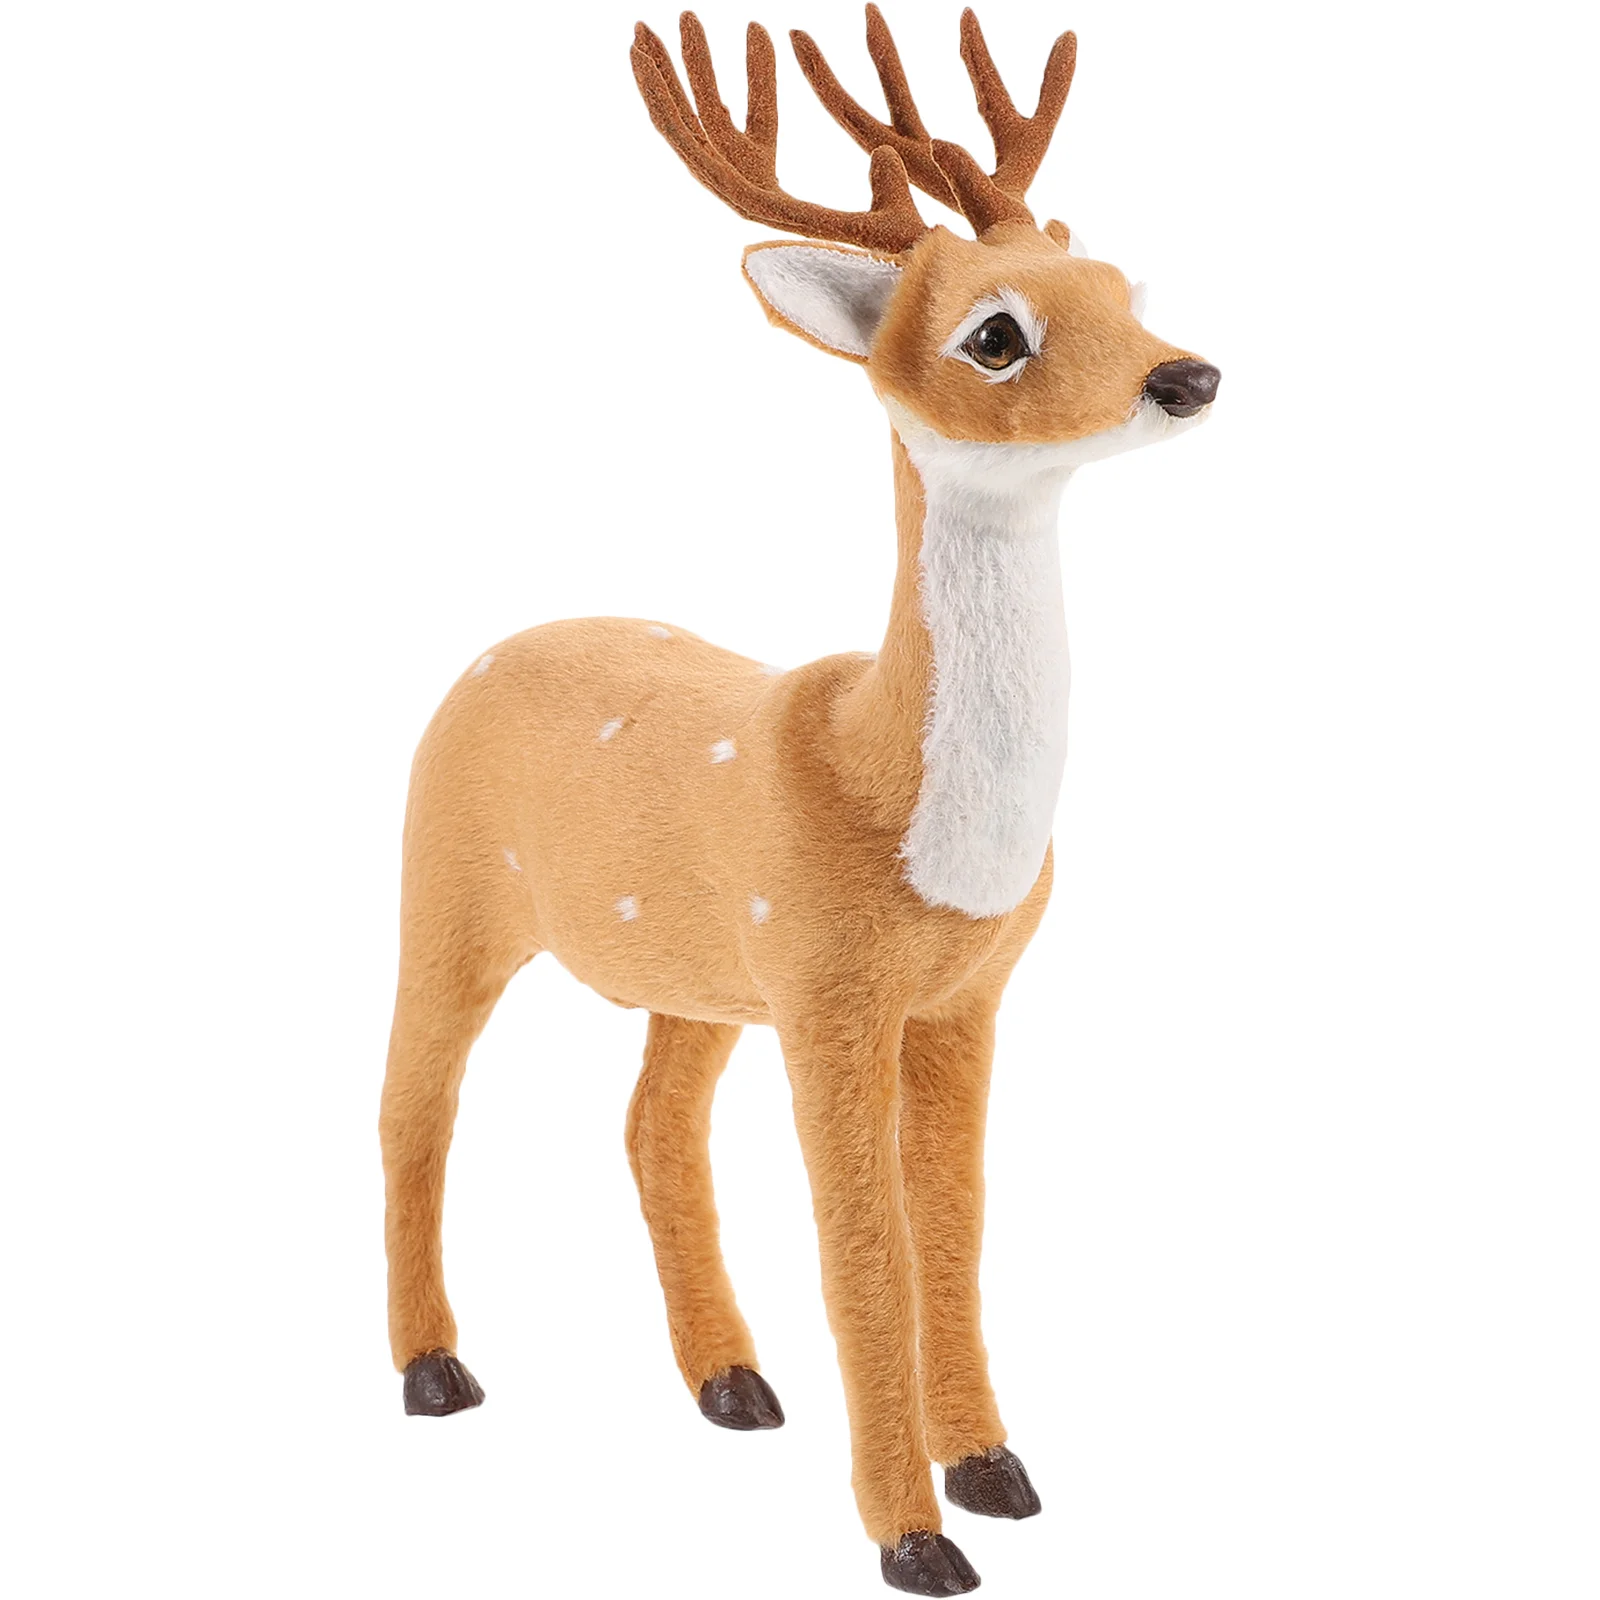 

Holiday Reindeer Decor Tabletop Centerpiece Decorations Christmas Party Figurines Elk Ornaments